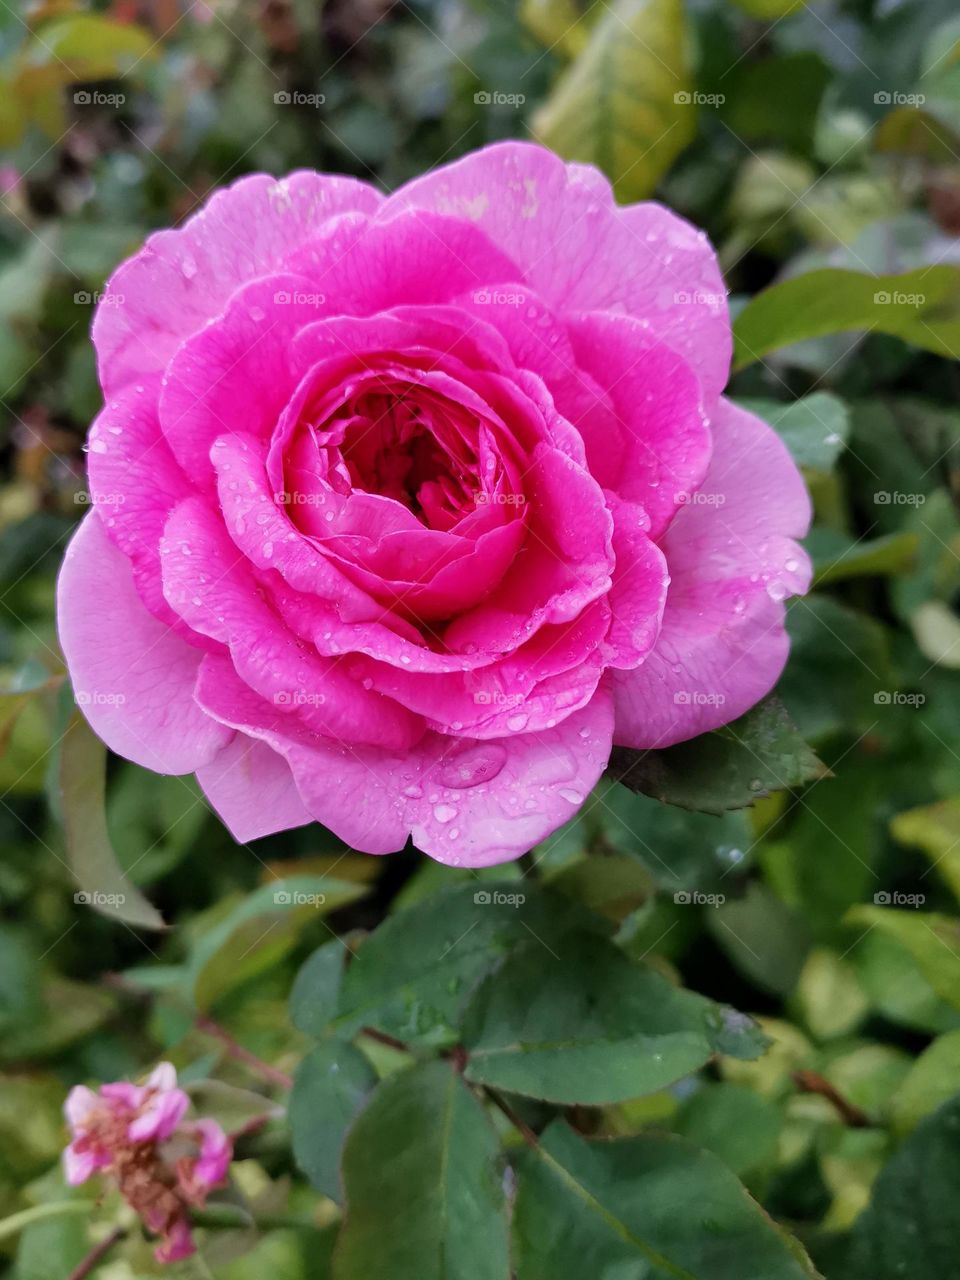 Pink rose with dew drops. Beautiful plants around us.